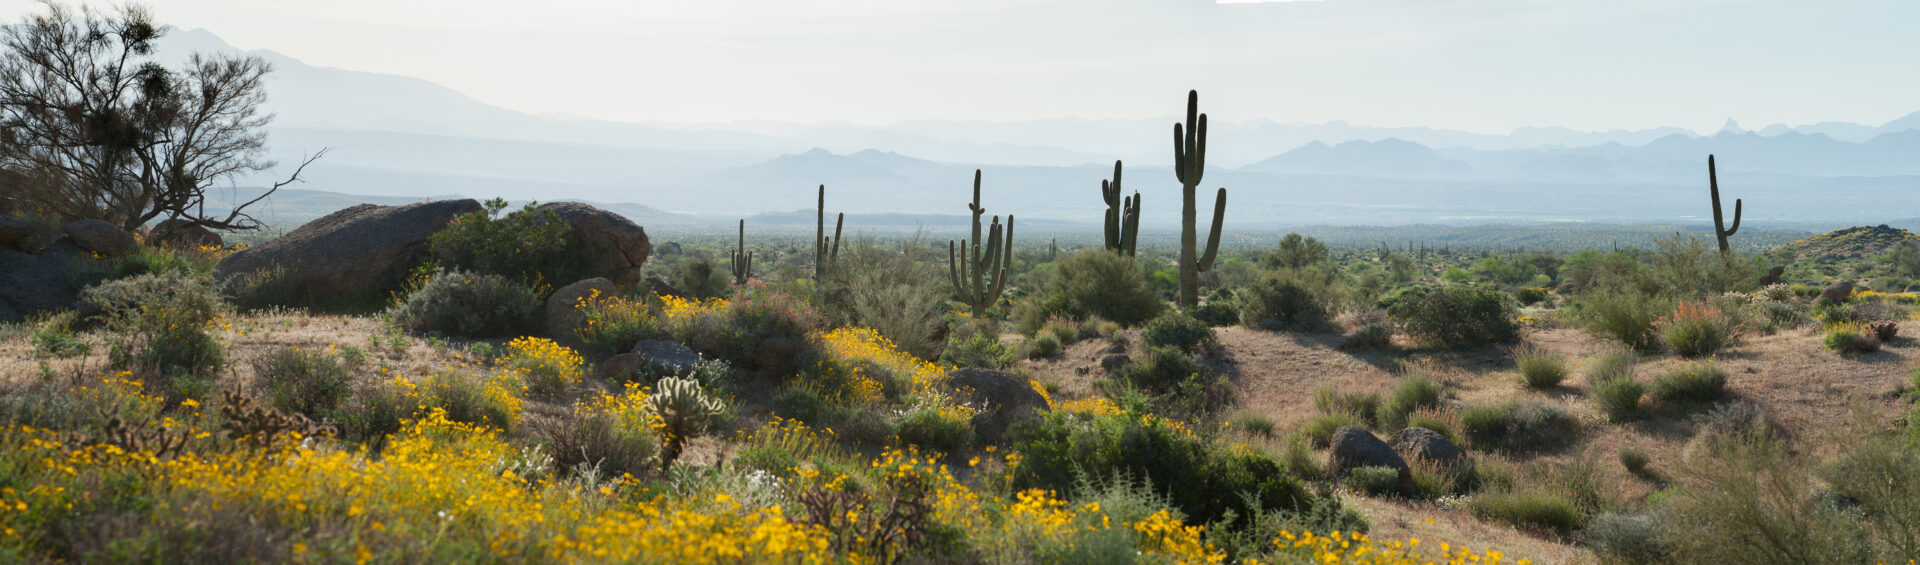 a desert landscape with yellow flowers, cacti and mountains in the background